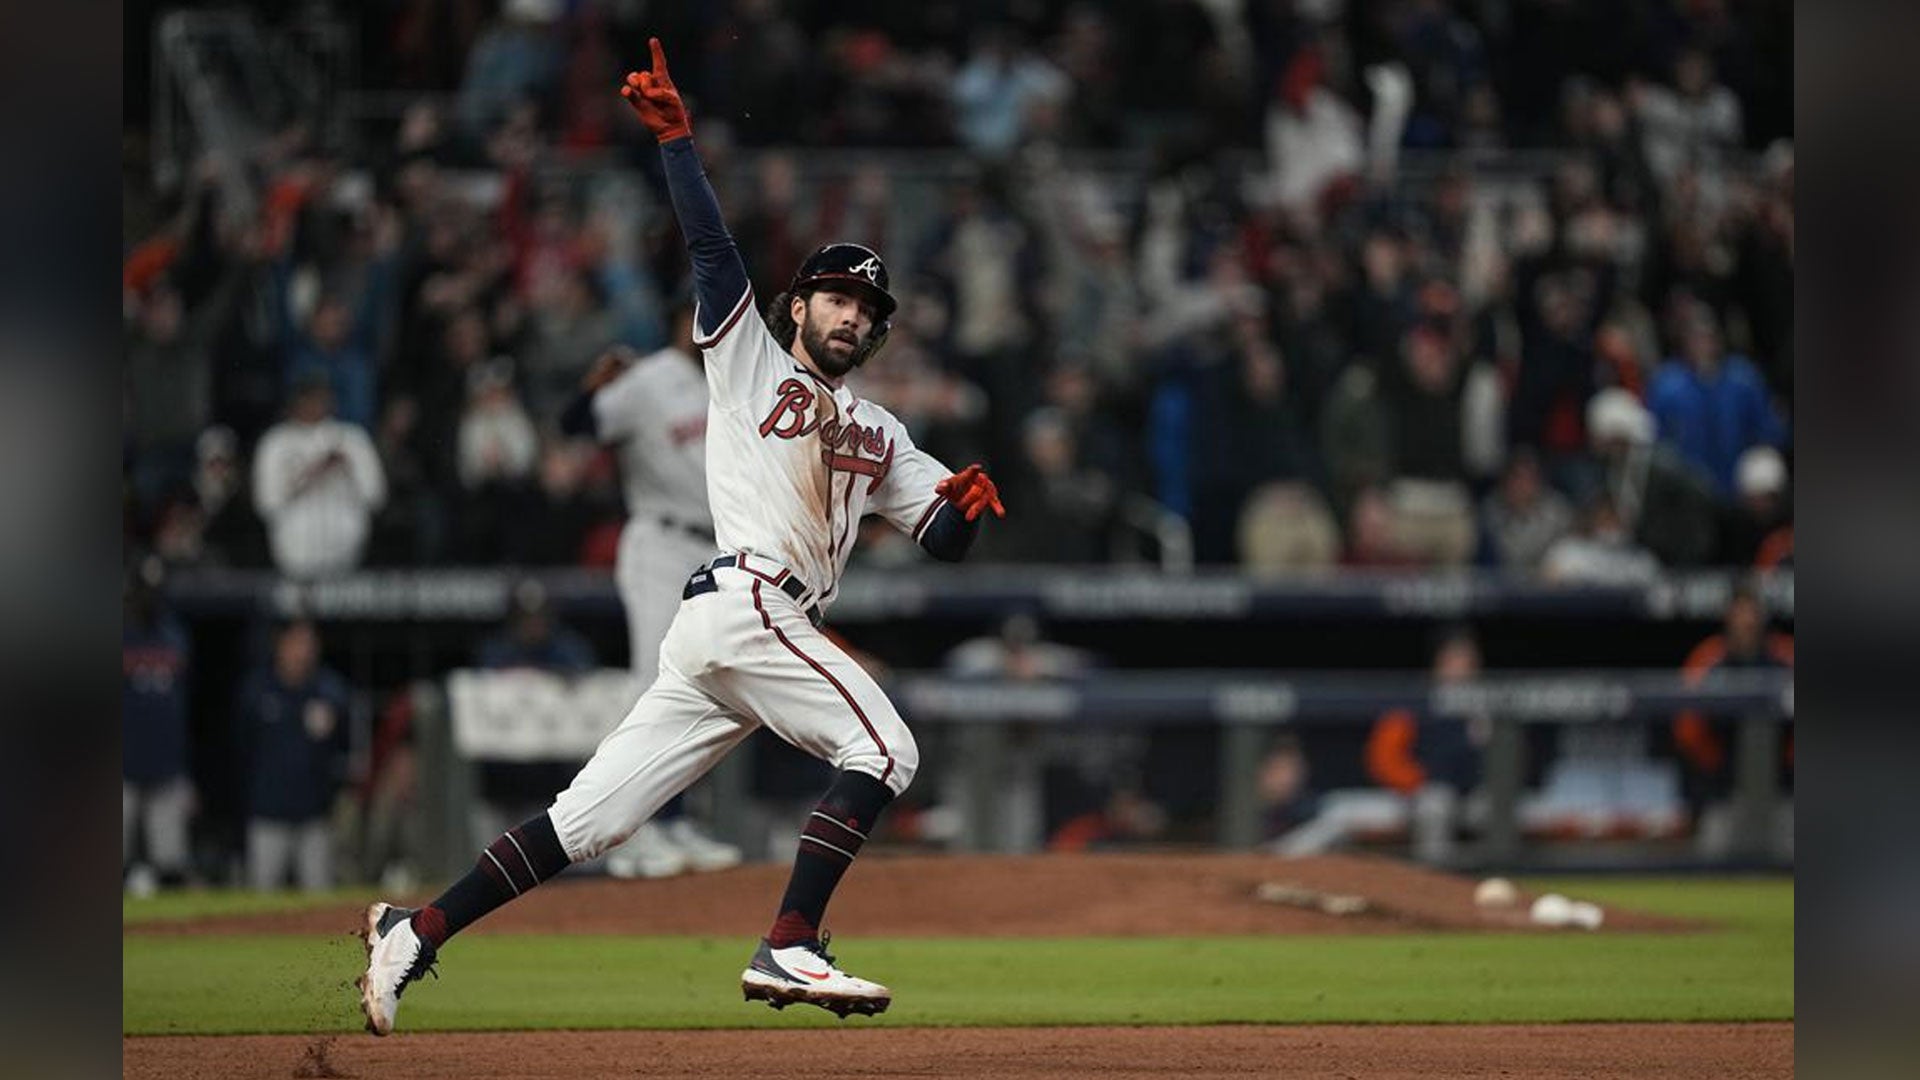 The Atlanta Braves are winning the 2021 World Series 3-to-2 in their pursuit of the championship. 